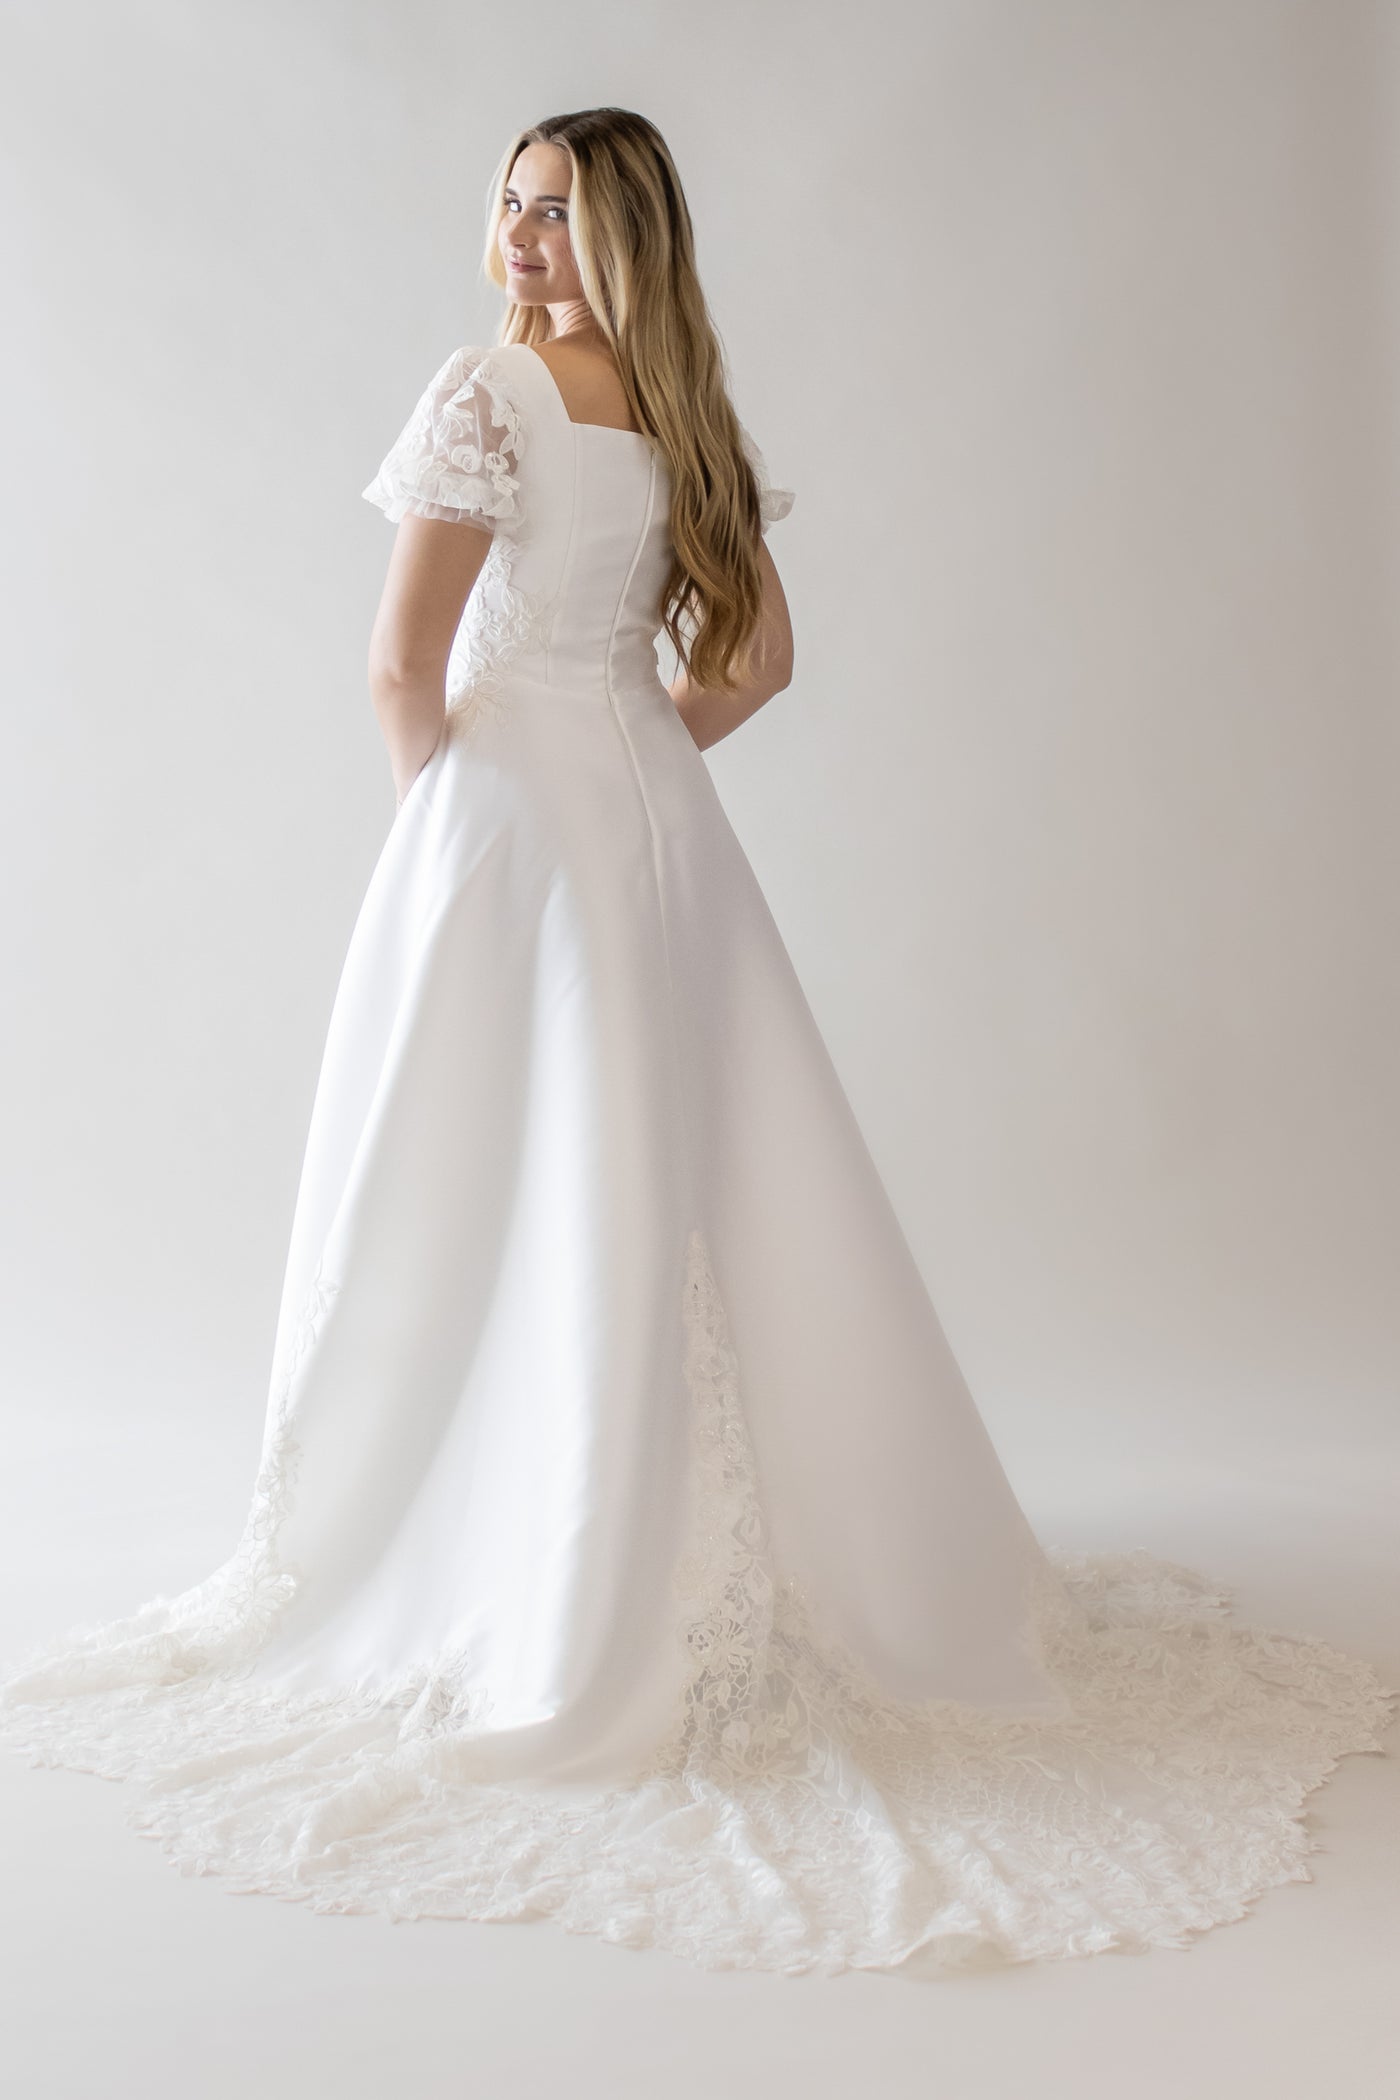 This is a modest wedding gown with a honeycomb lace train, shear laace puff sleeves, and an a-line silhouette.